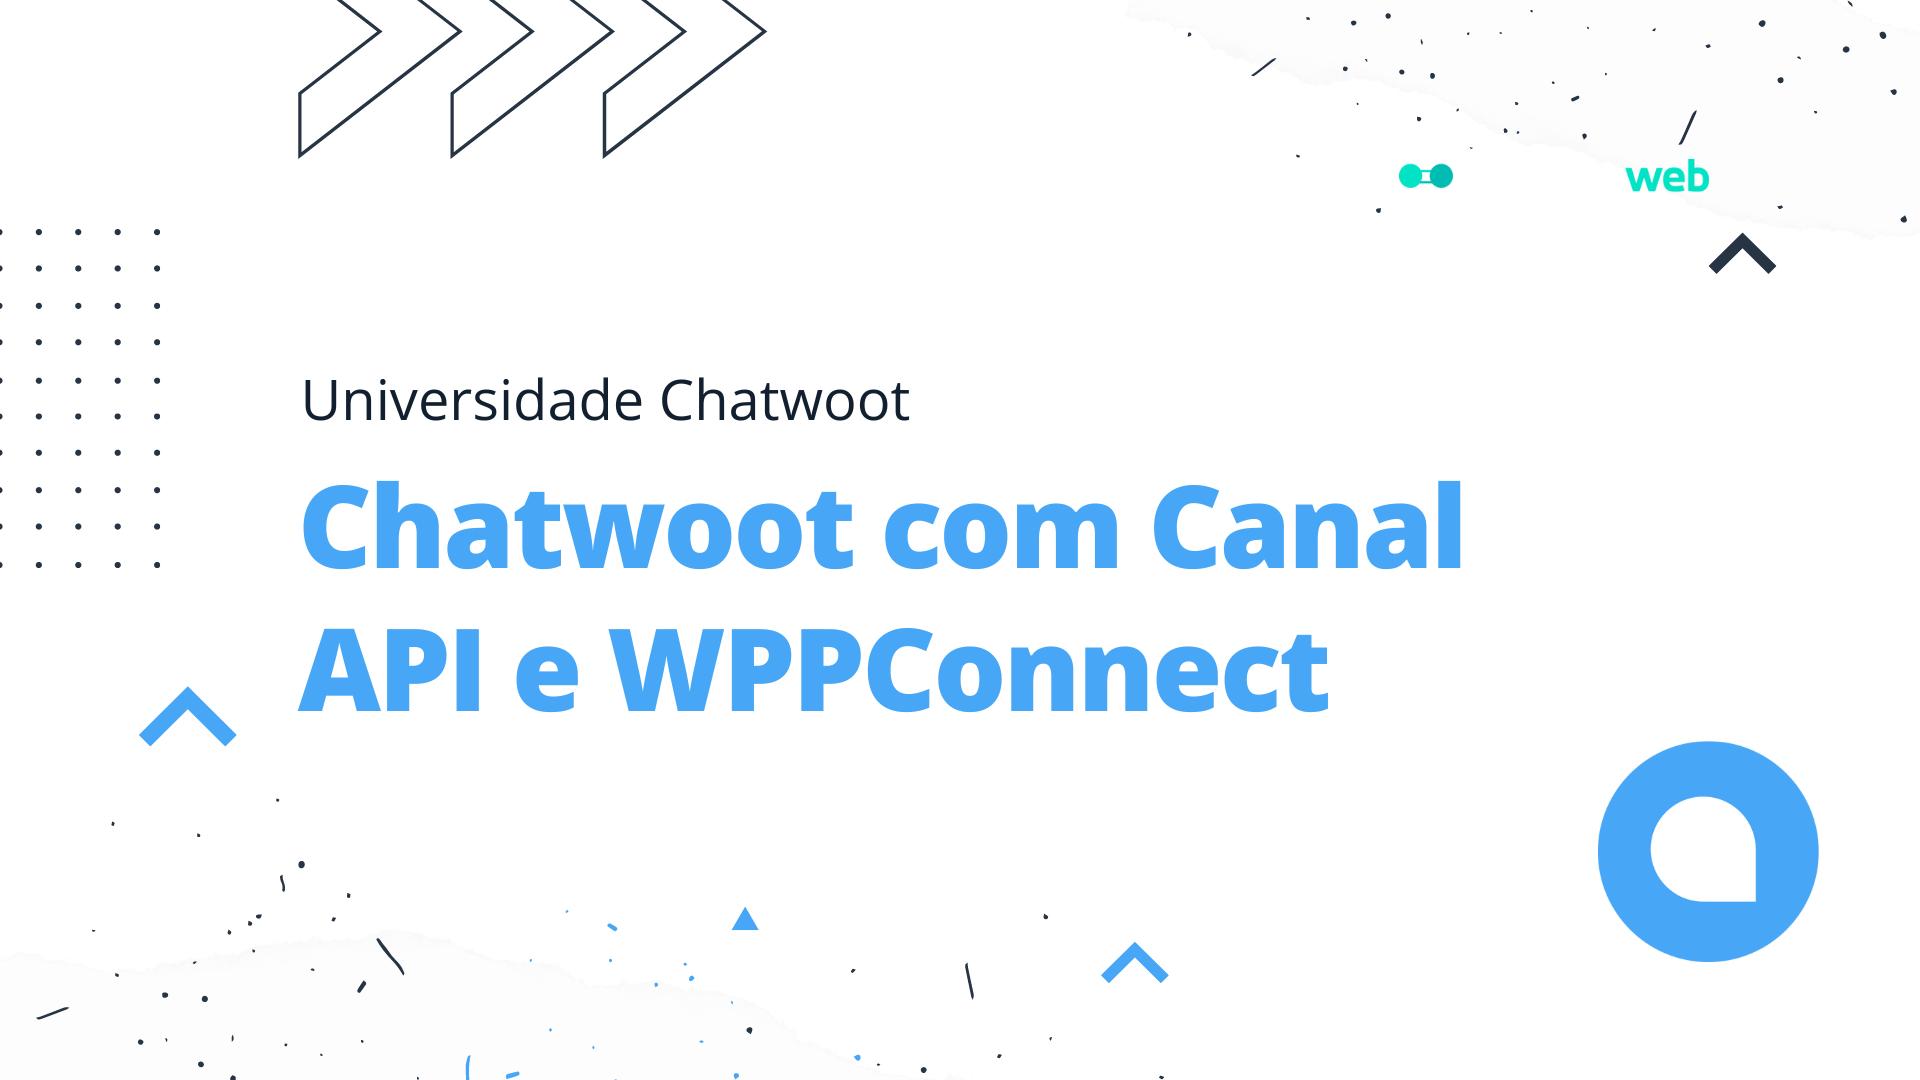 Chatwoot com Canal API e WPPConnect